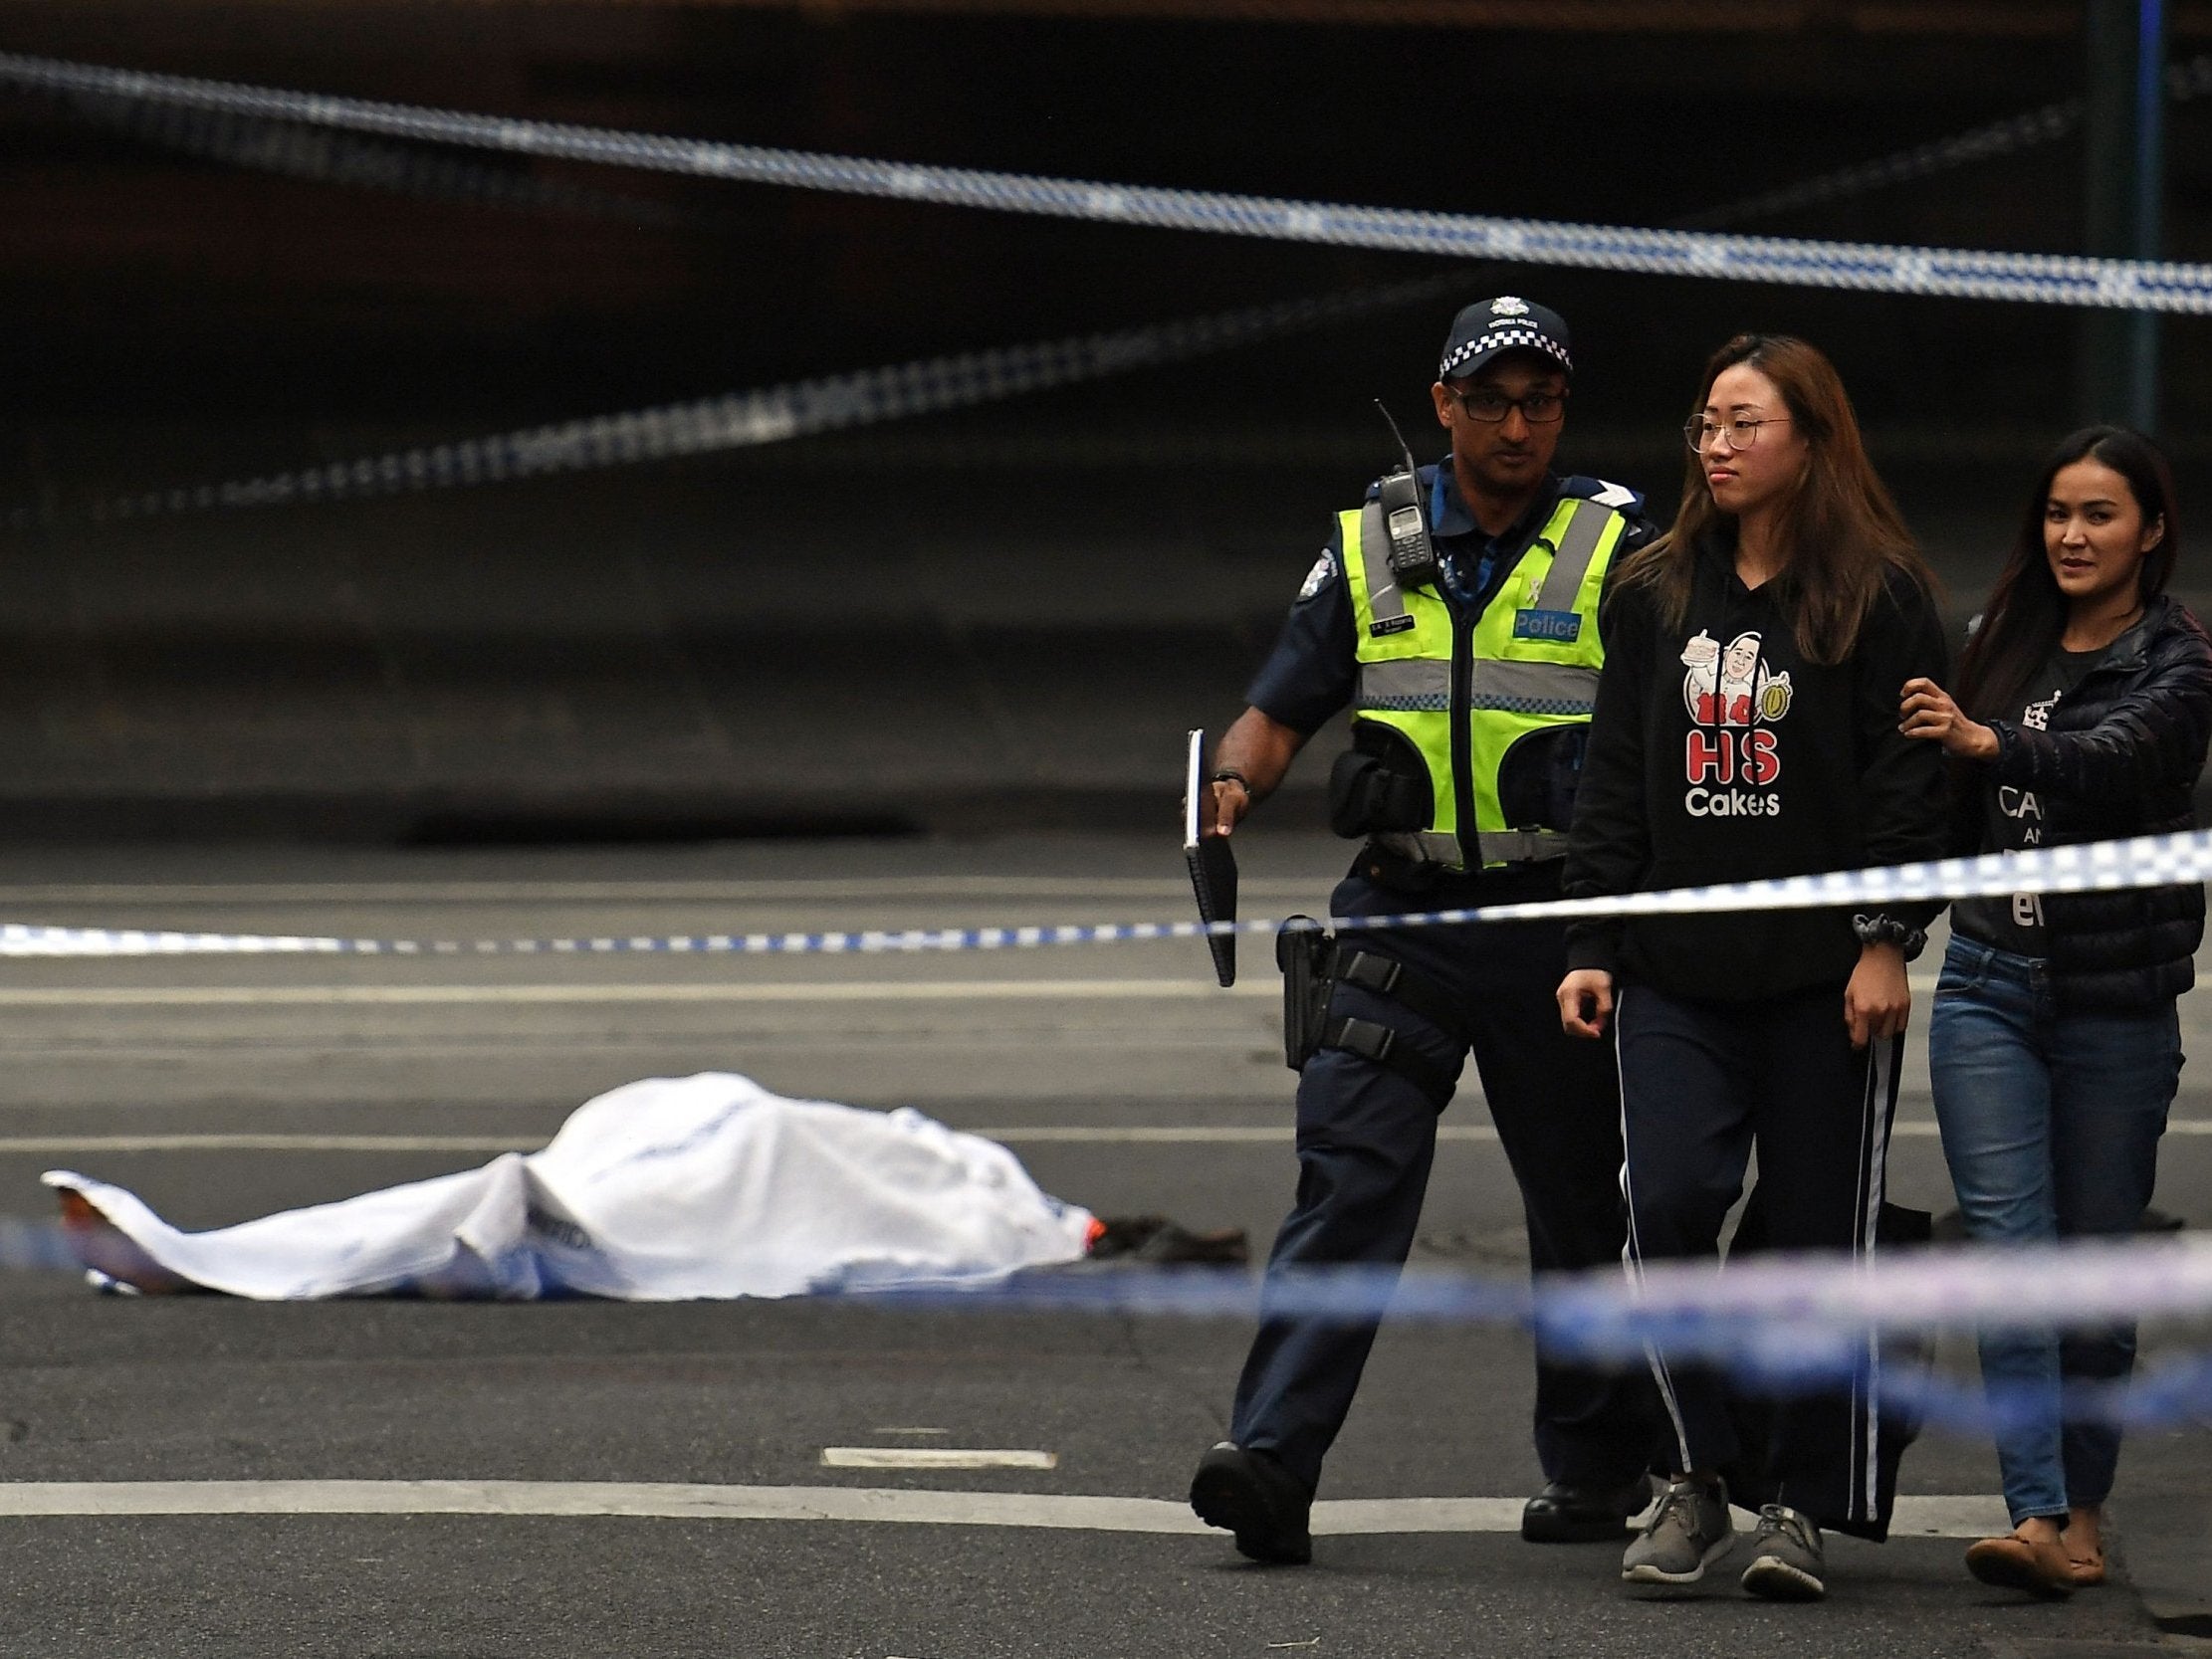 A police officer directs people away from the crime scene as a body is seen covered with a white sheet following a stabbing incident in Melbourne